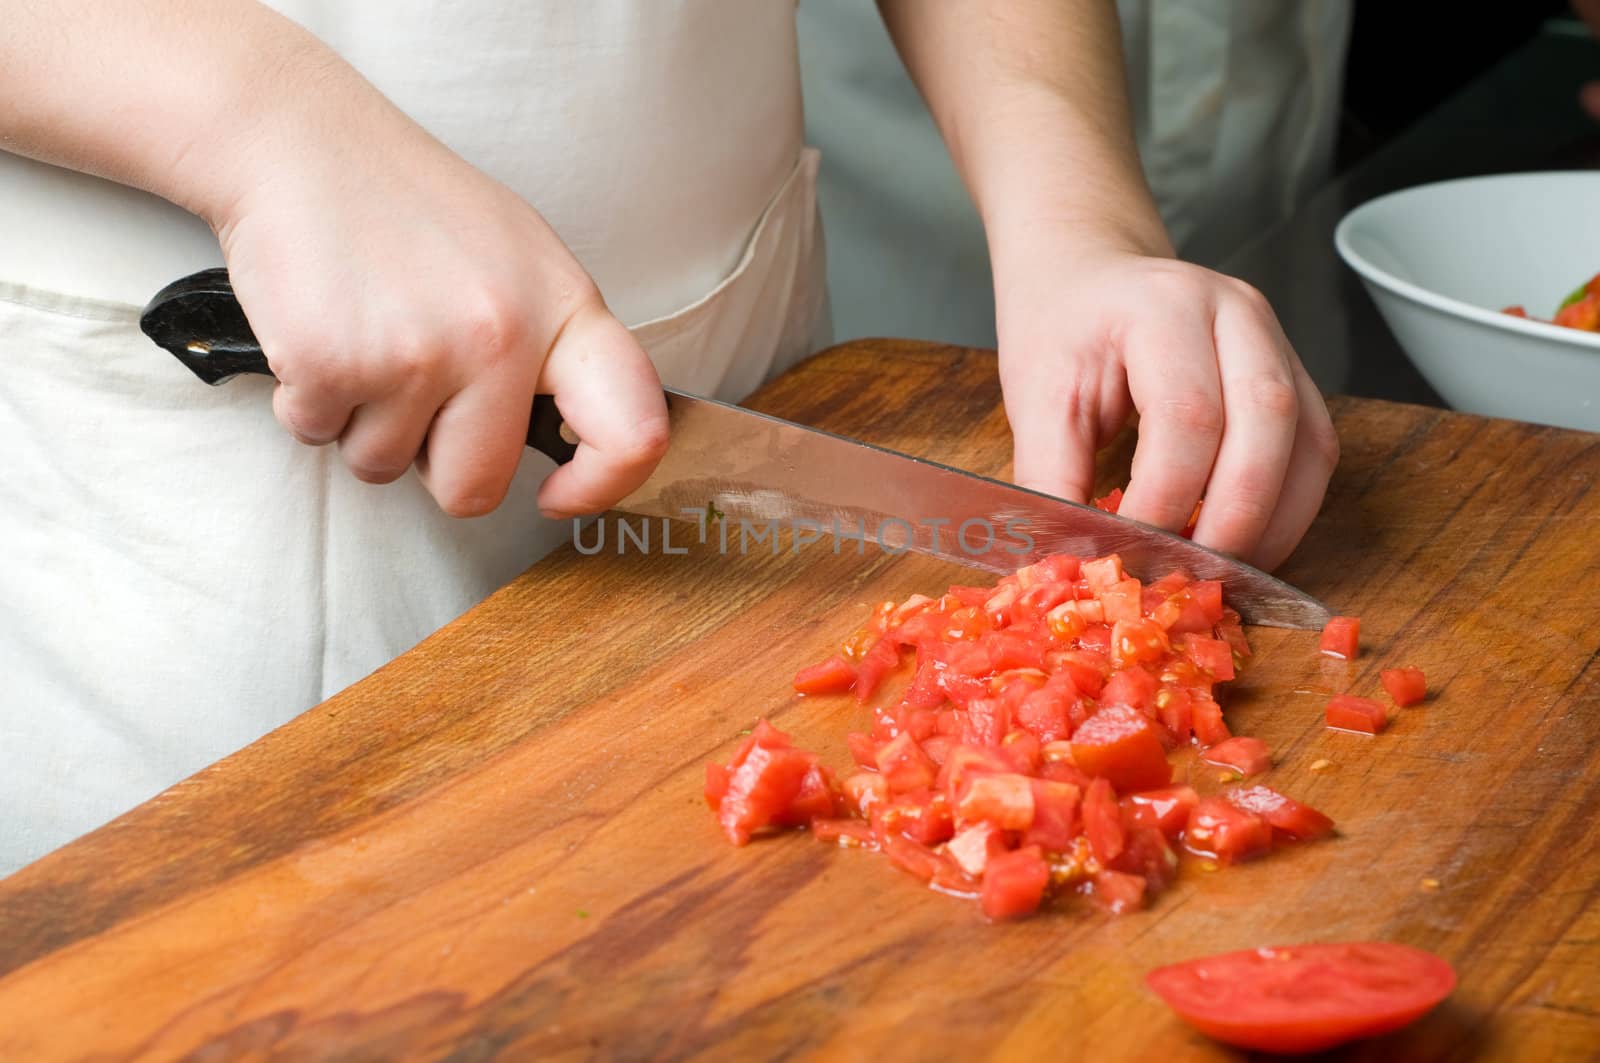 chopping the tomato using big knife on the wooden cutting board